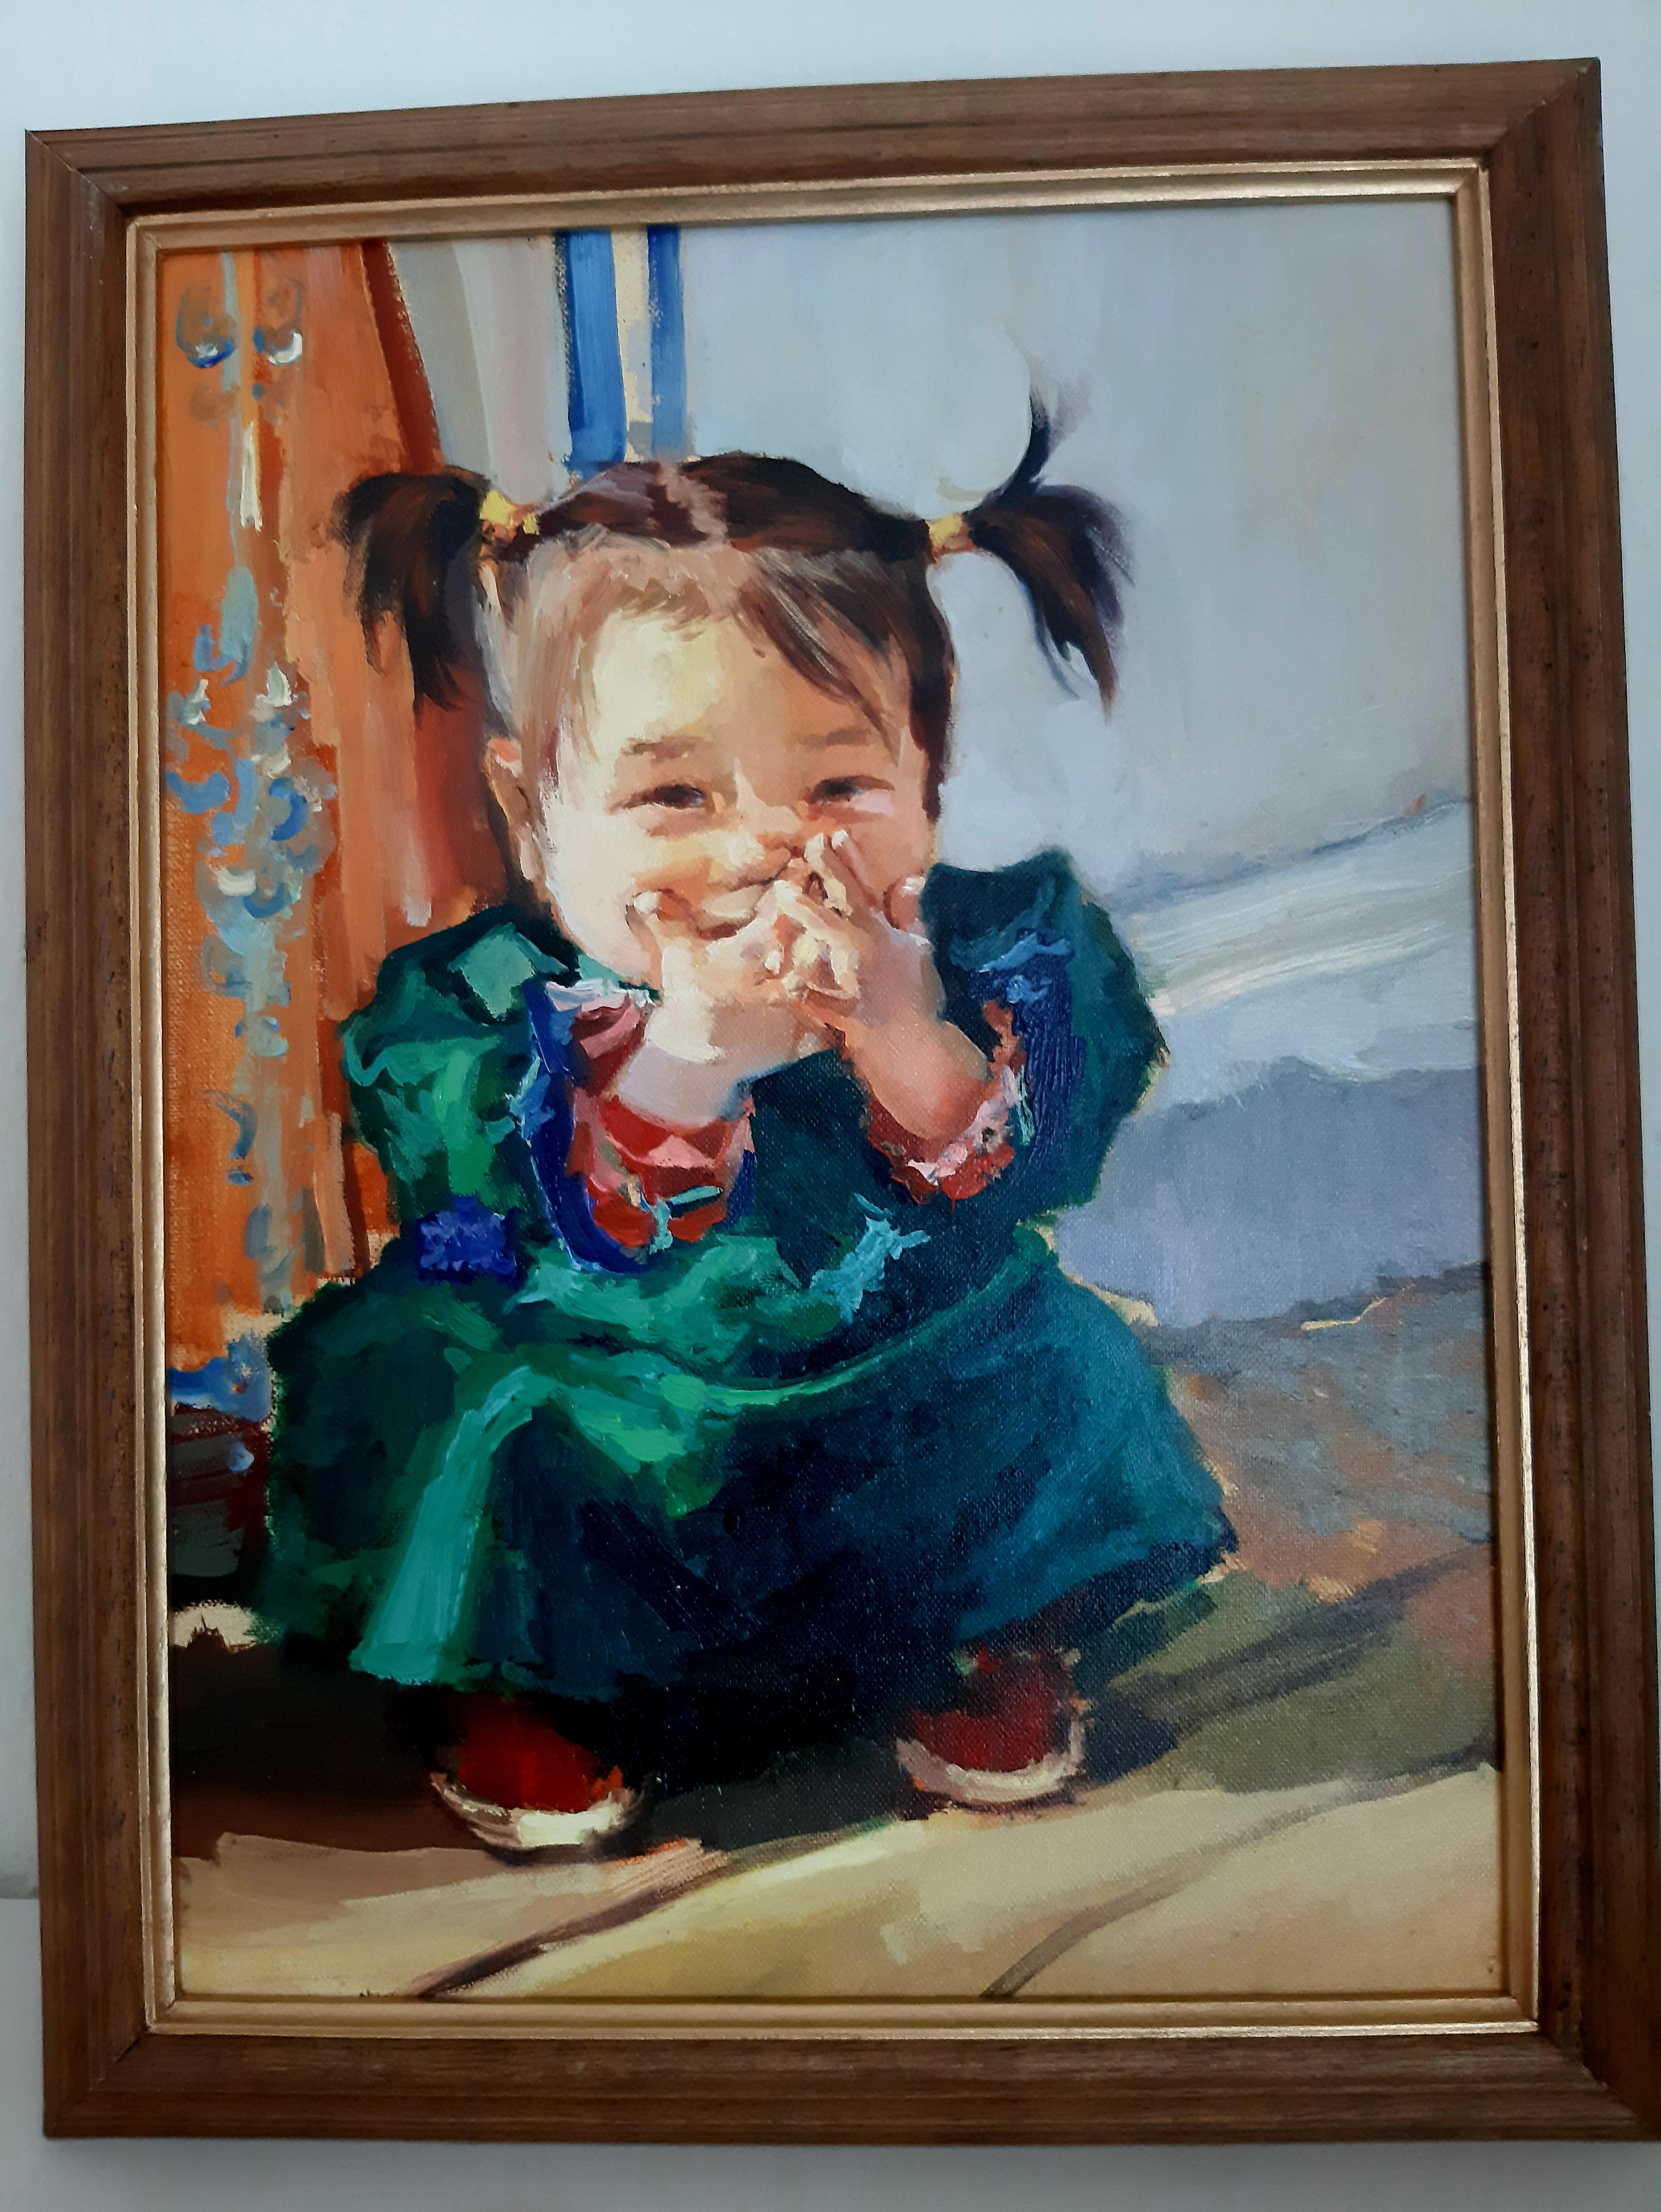  Oil on canvas. In this painting, we see a little girl sitting on her haunches and crossing her fingers near her face as if she holds a secret in her small hands. In this simple gesture, the emotions and mood of the little child are